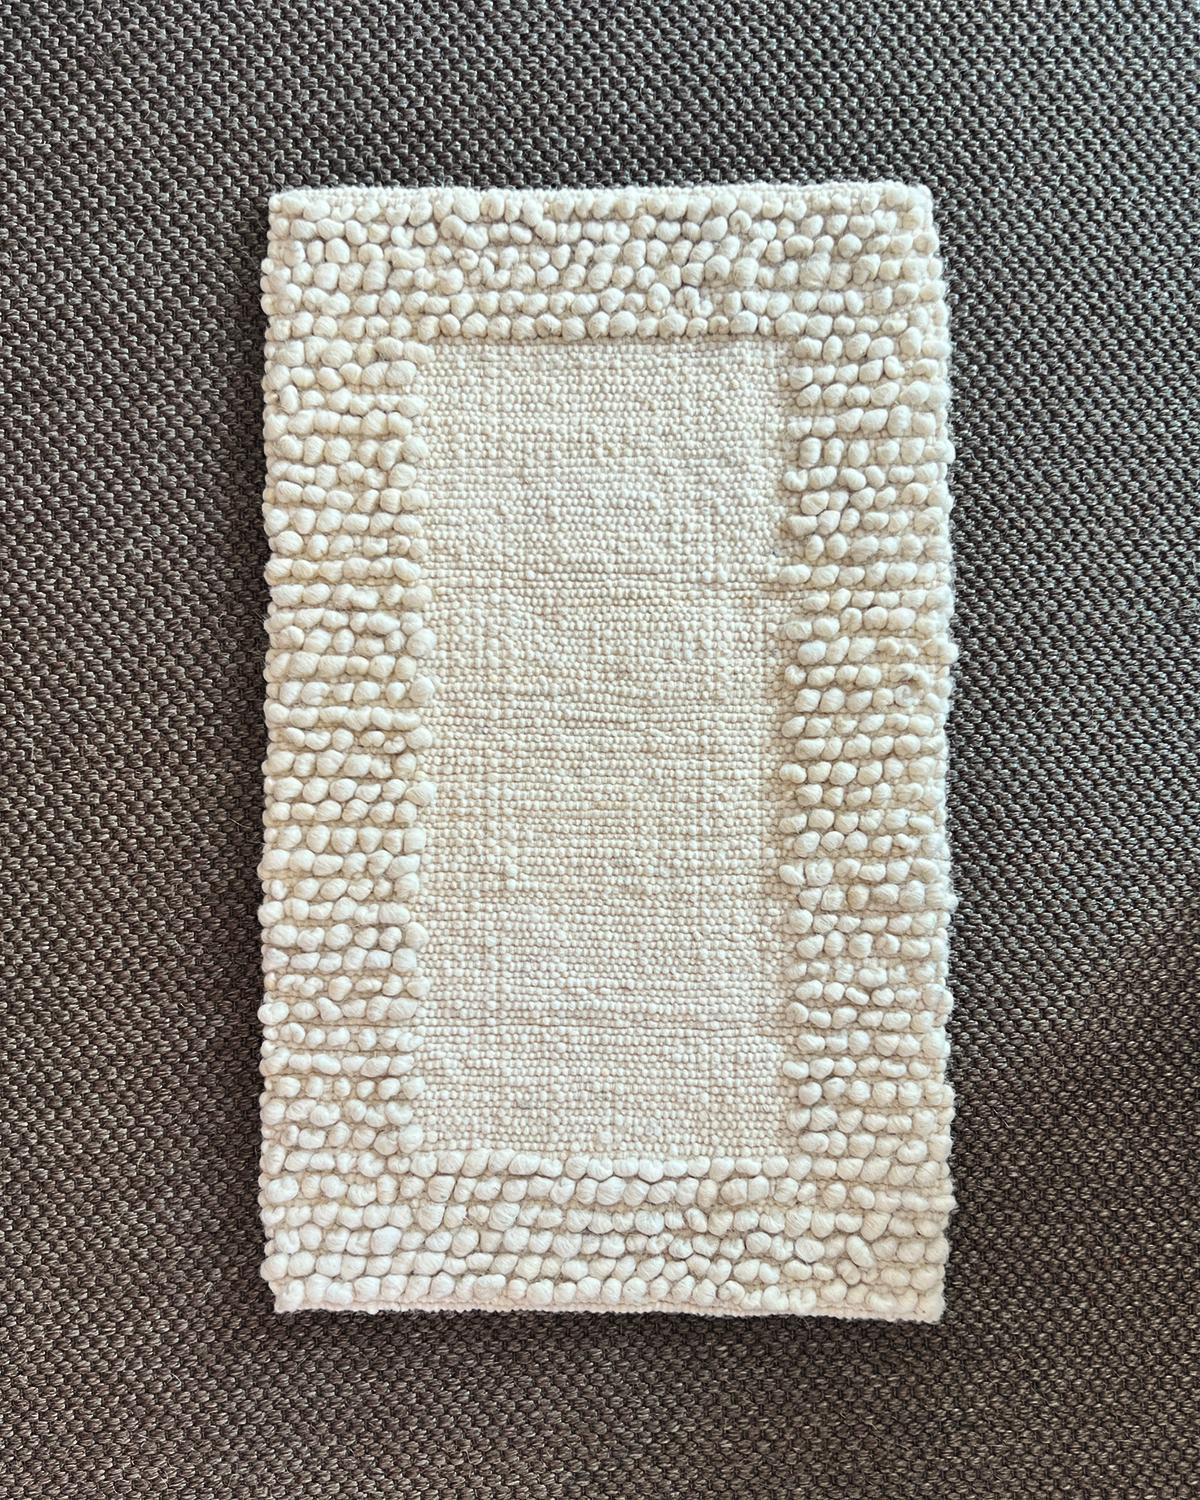 Hand-Woven Fatima Bobble Frame Sheep Wool Area Rug in White 2.5ft by 4ft, Handmade For Sale